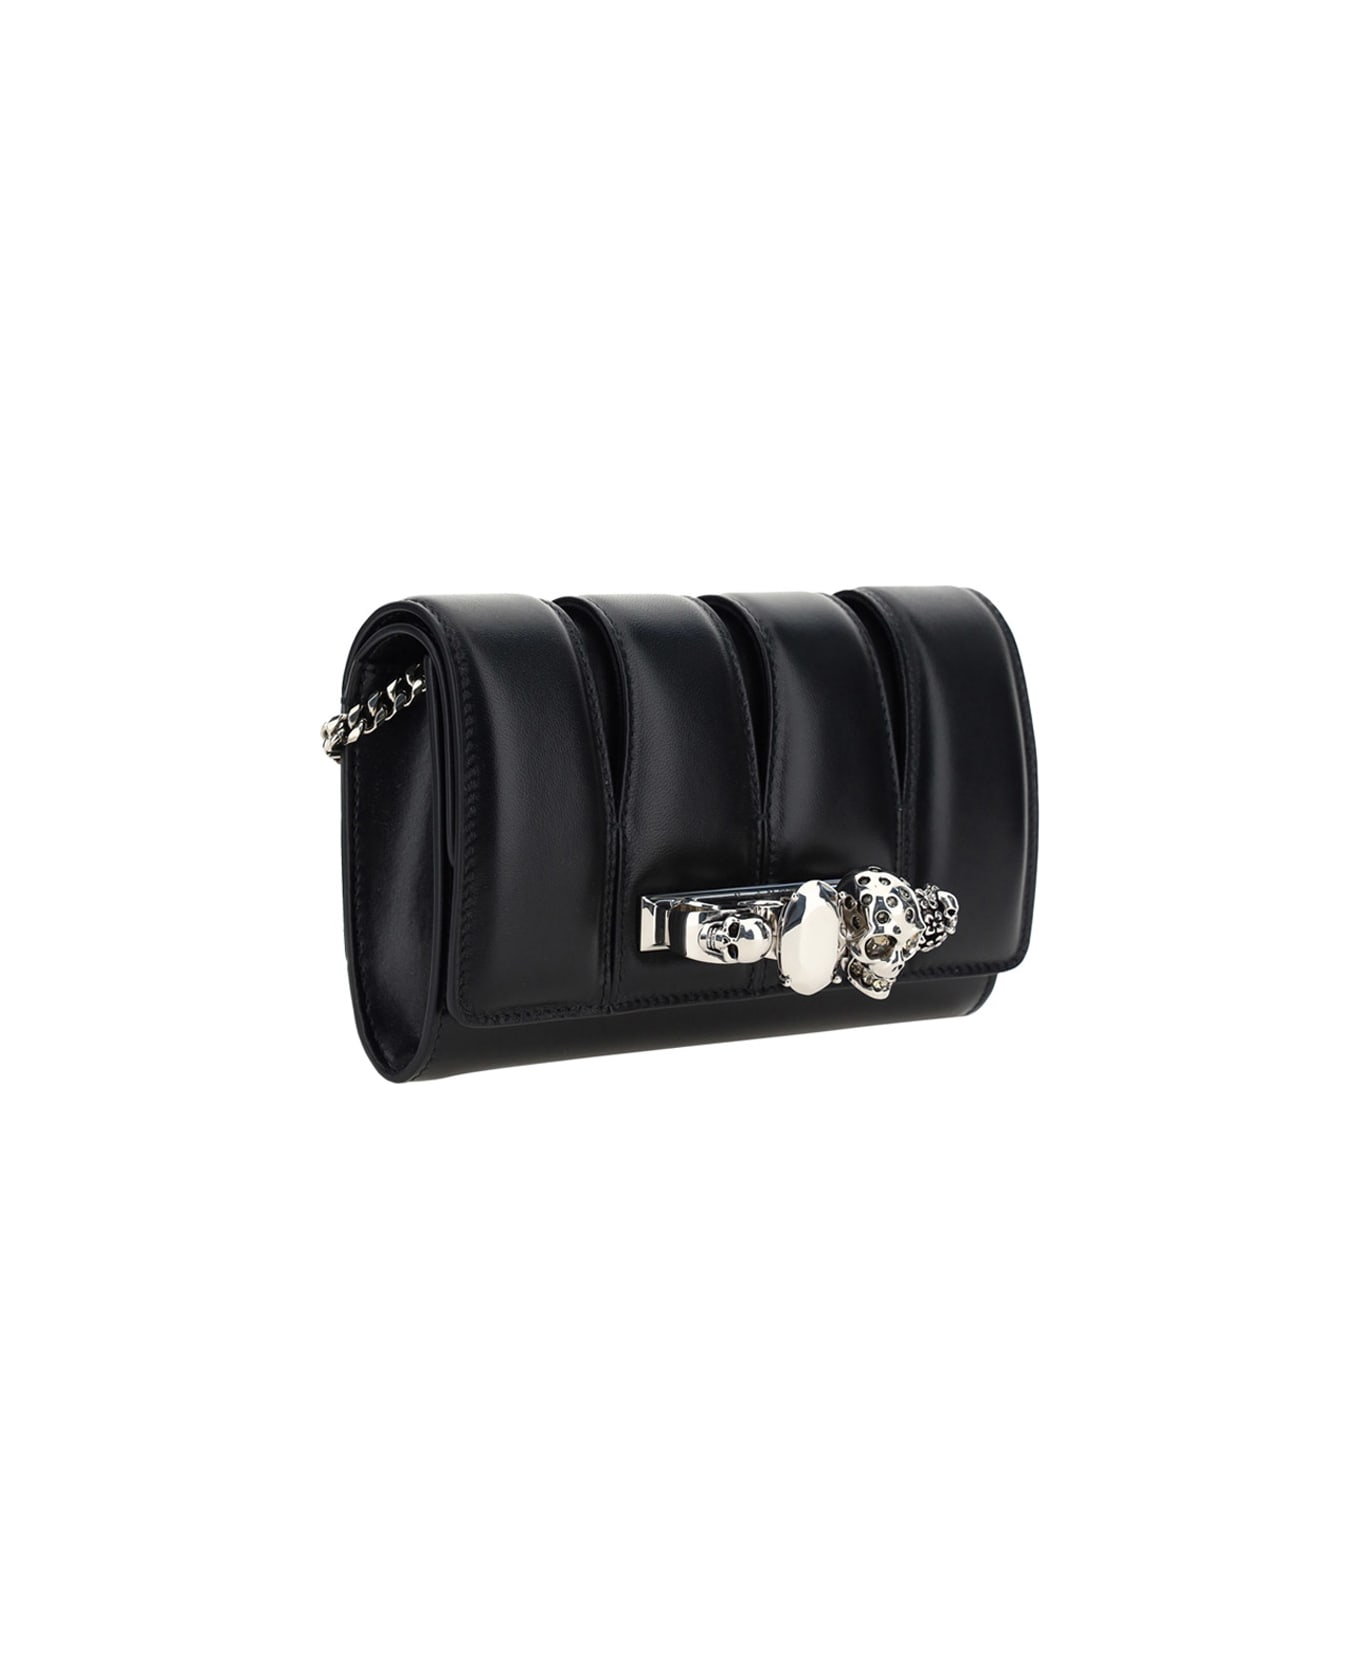 Alexander McQueen 'the Slush' Clutch With Skull Detail In Leather Woman - Black クラッチバッグ